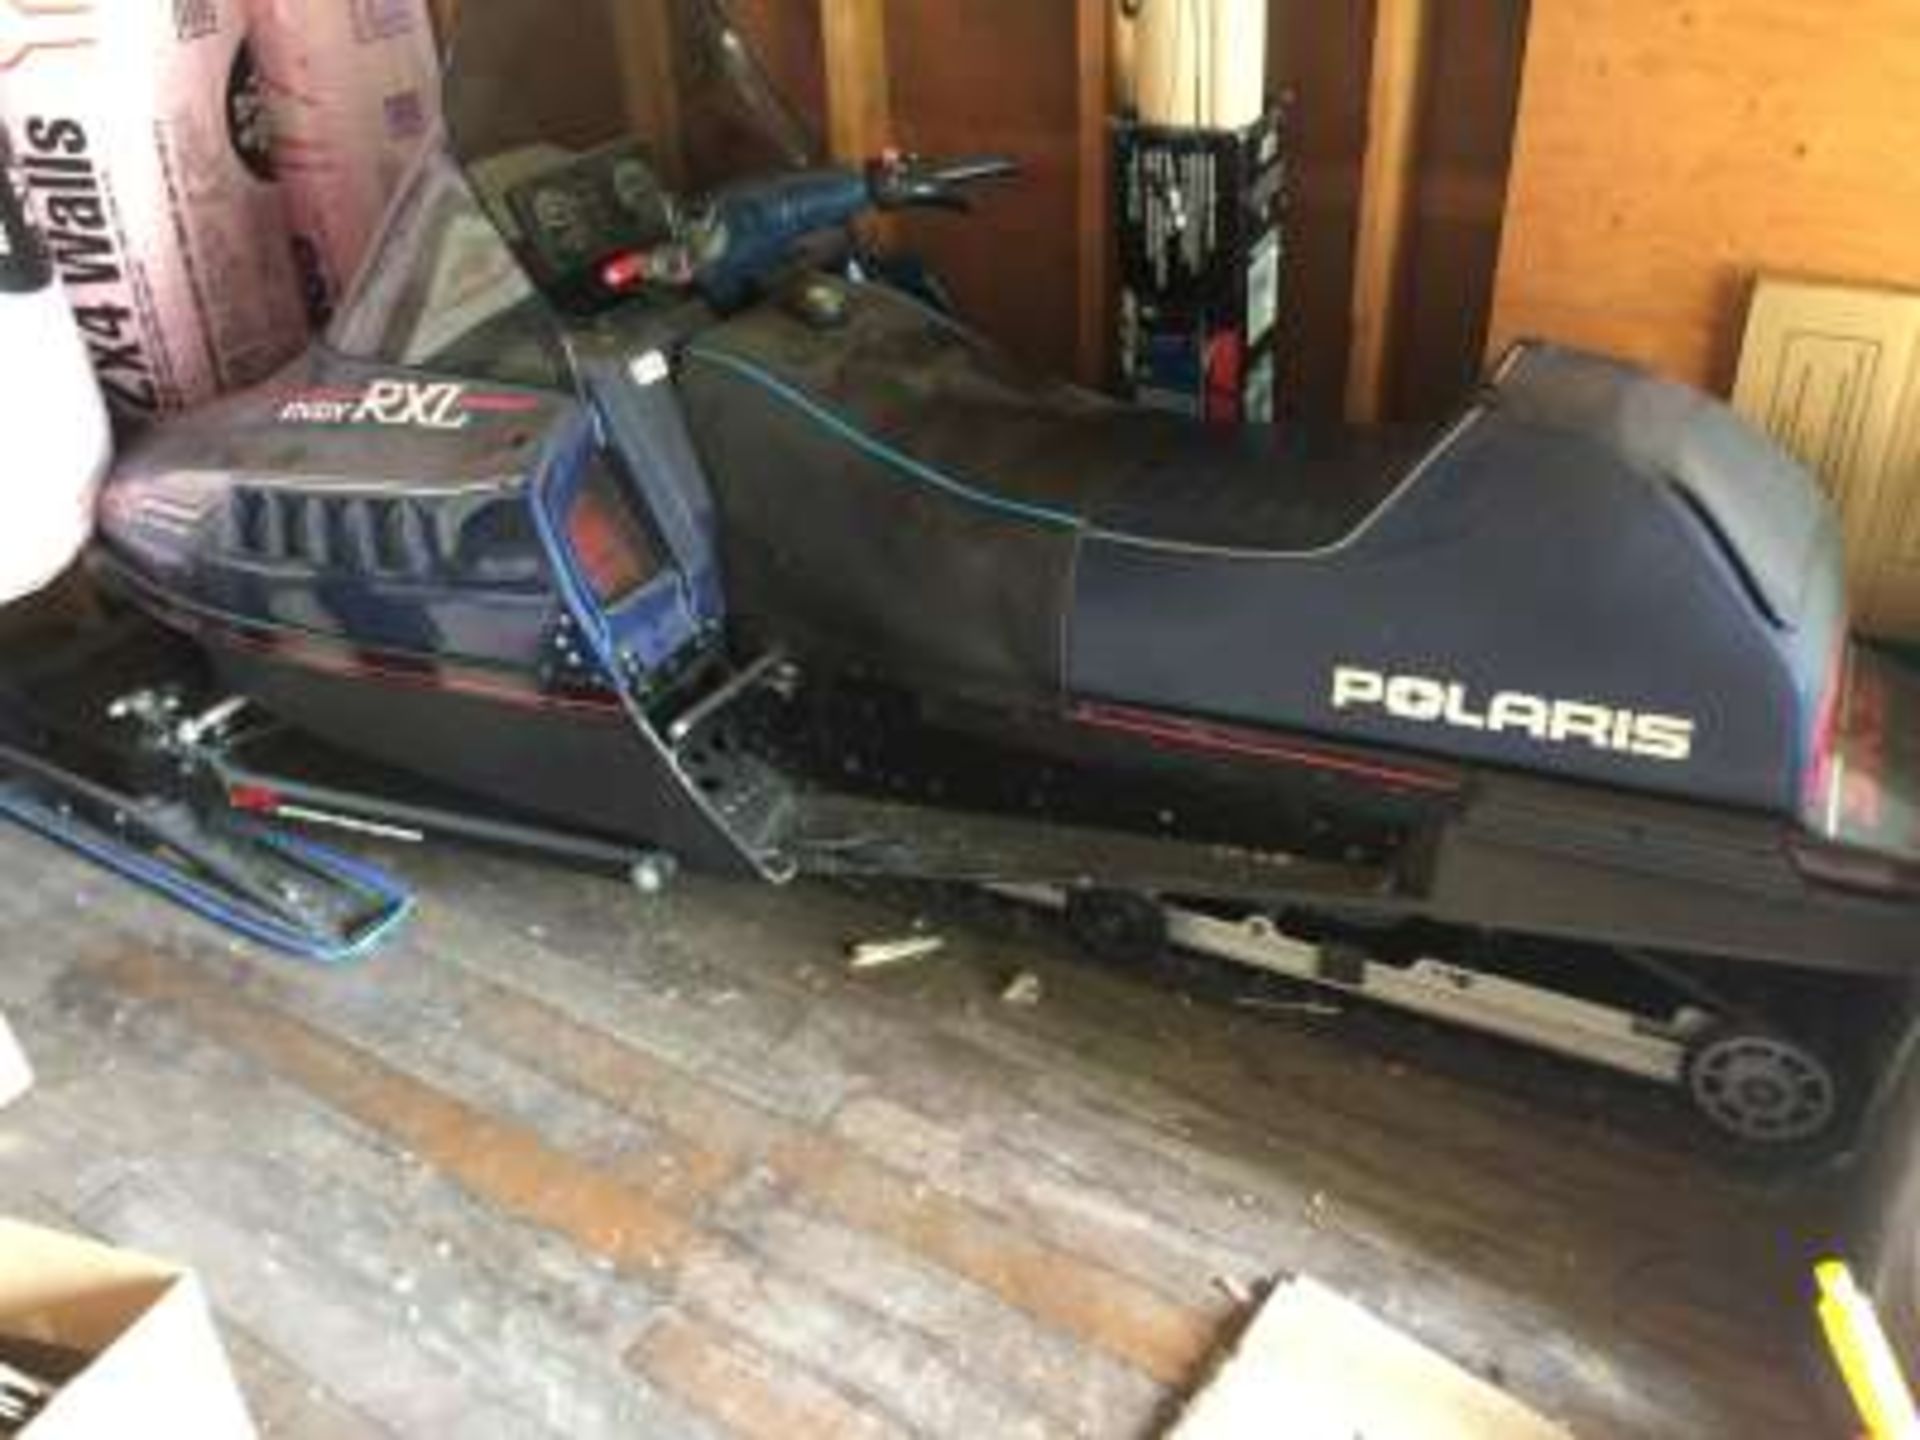 1990 Indy RXL Polaris 650 Triple snowmobile, 3500 miles, reverse, fuel injected, independent - Image 4 of 10